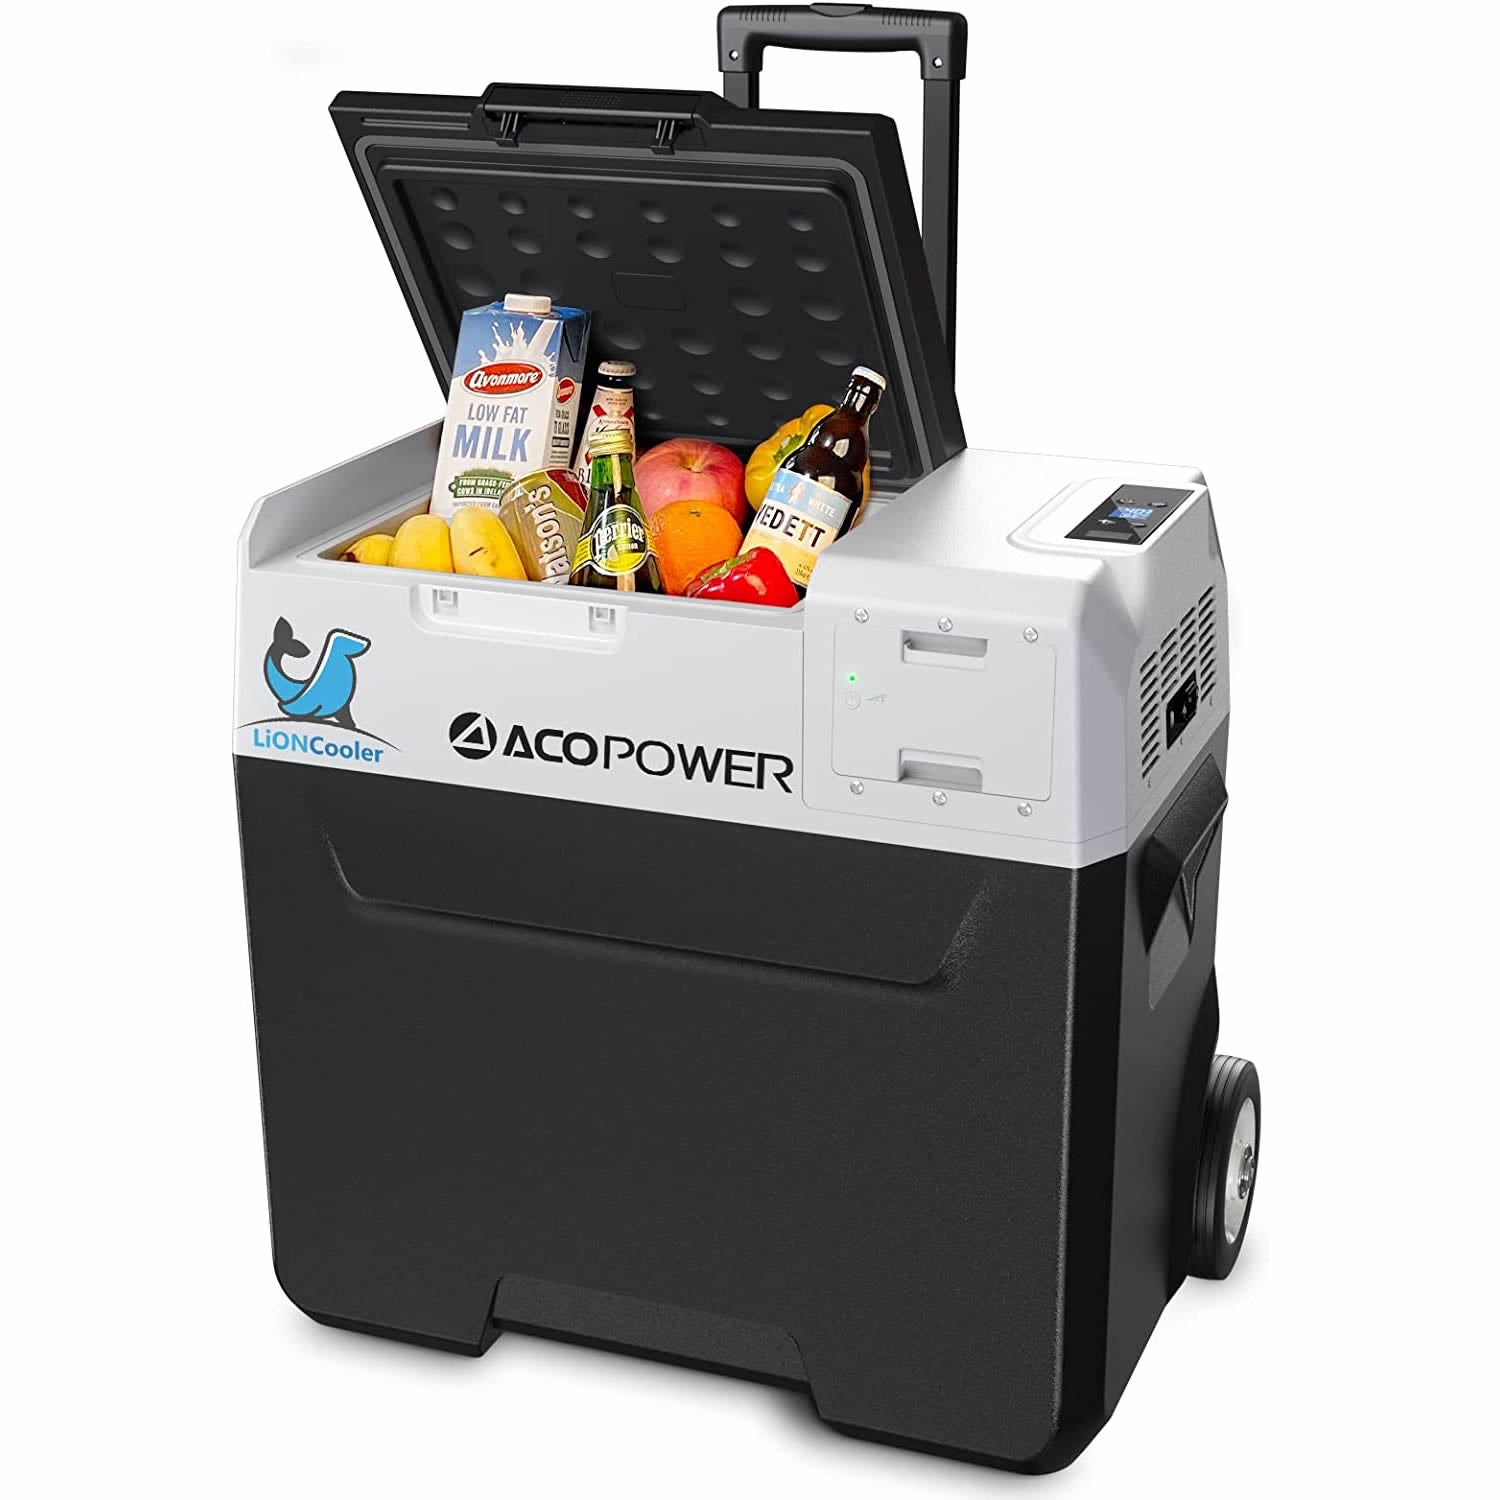 ACOPOWER LionCooler X50A Combo, Portable Solar Freezer (52 Quart Capacity) & Extra Backup 173Wh Battery by ACOPOWER